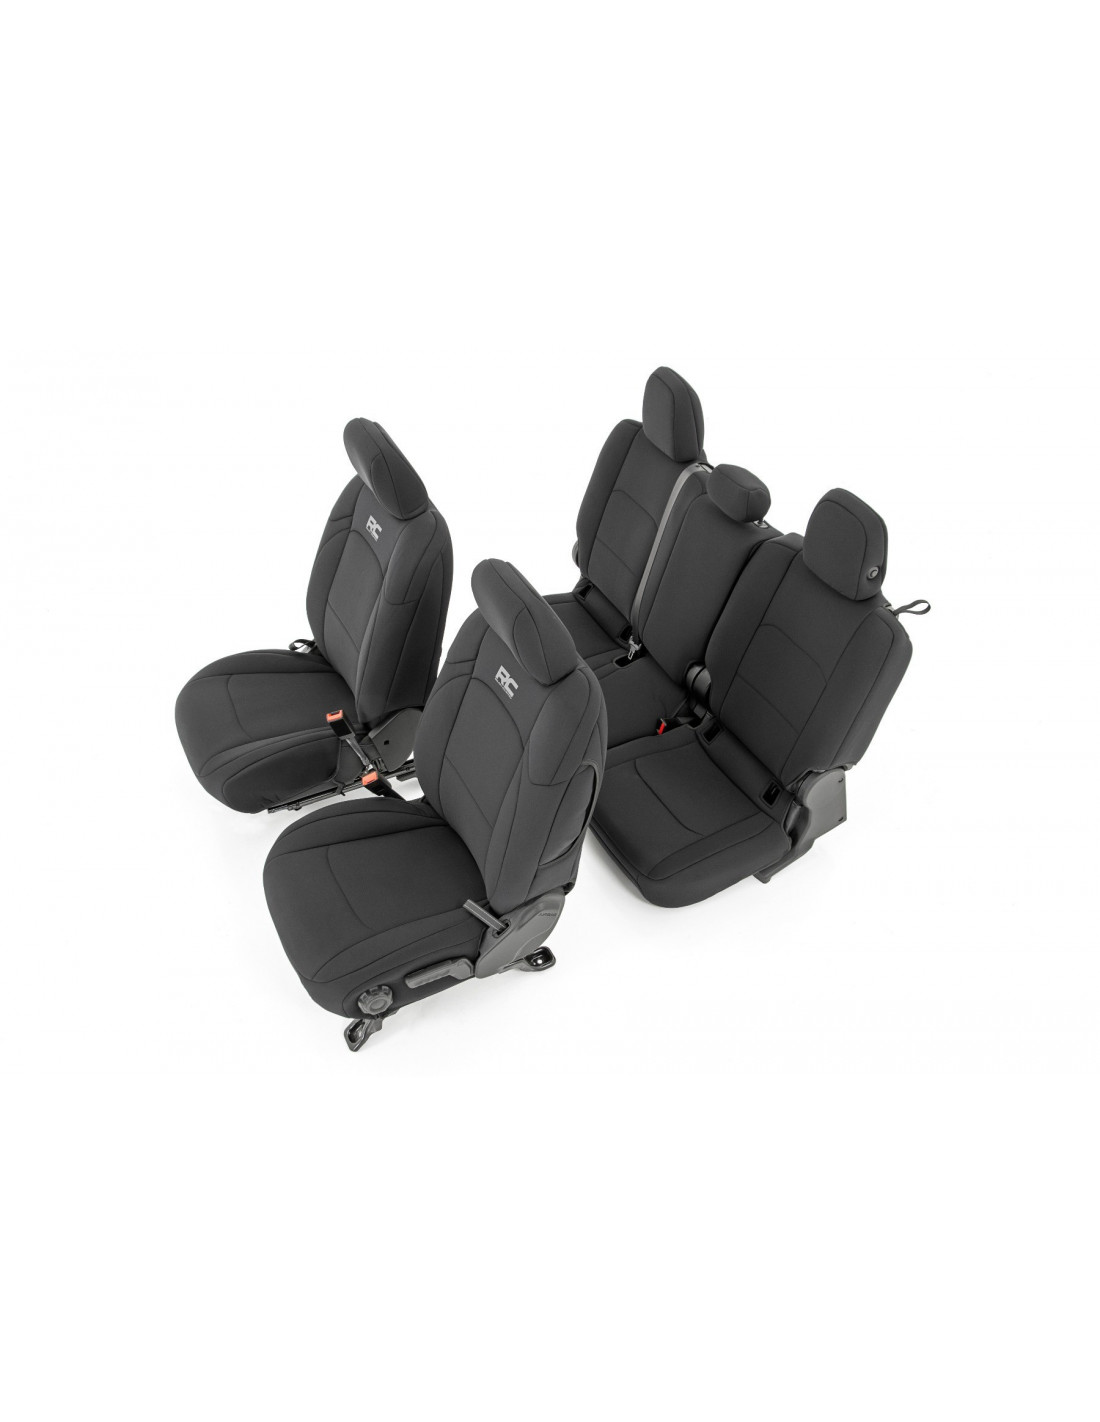 ROUGH COUNTRY SEAT COVERS, FRONT AND RR W/ CUP HOLDER